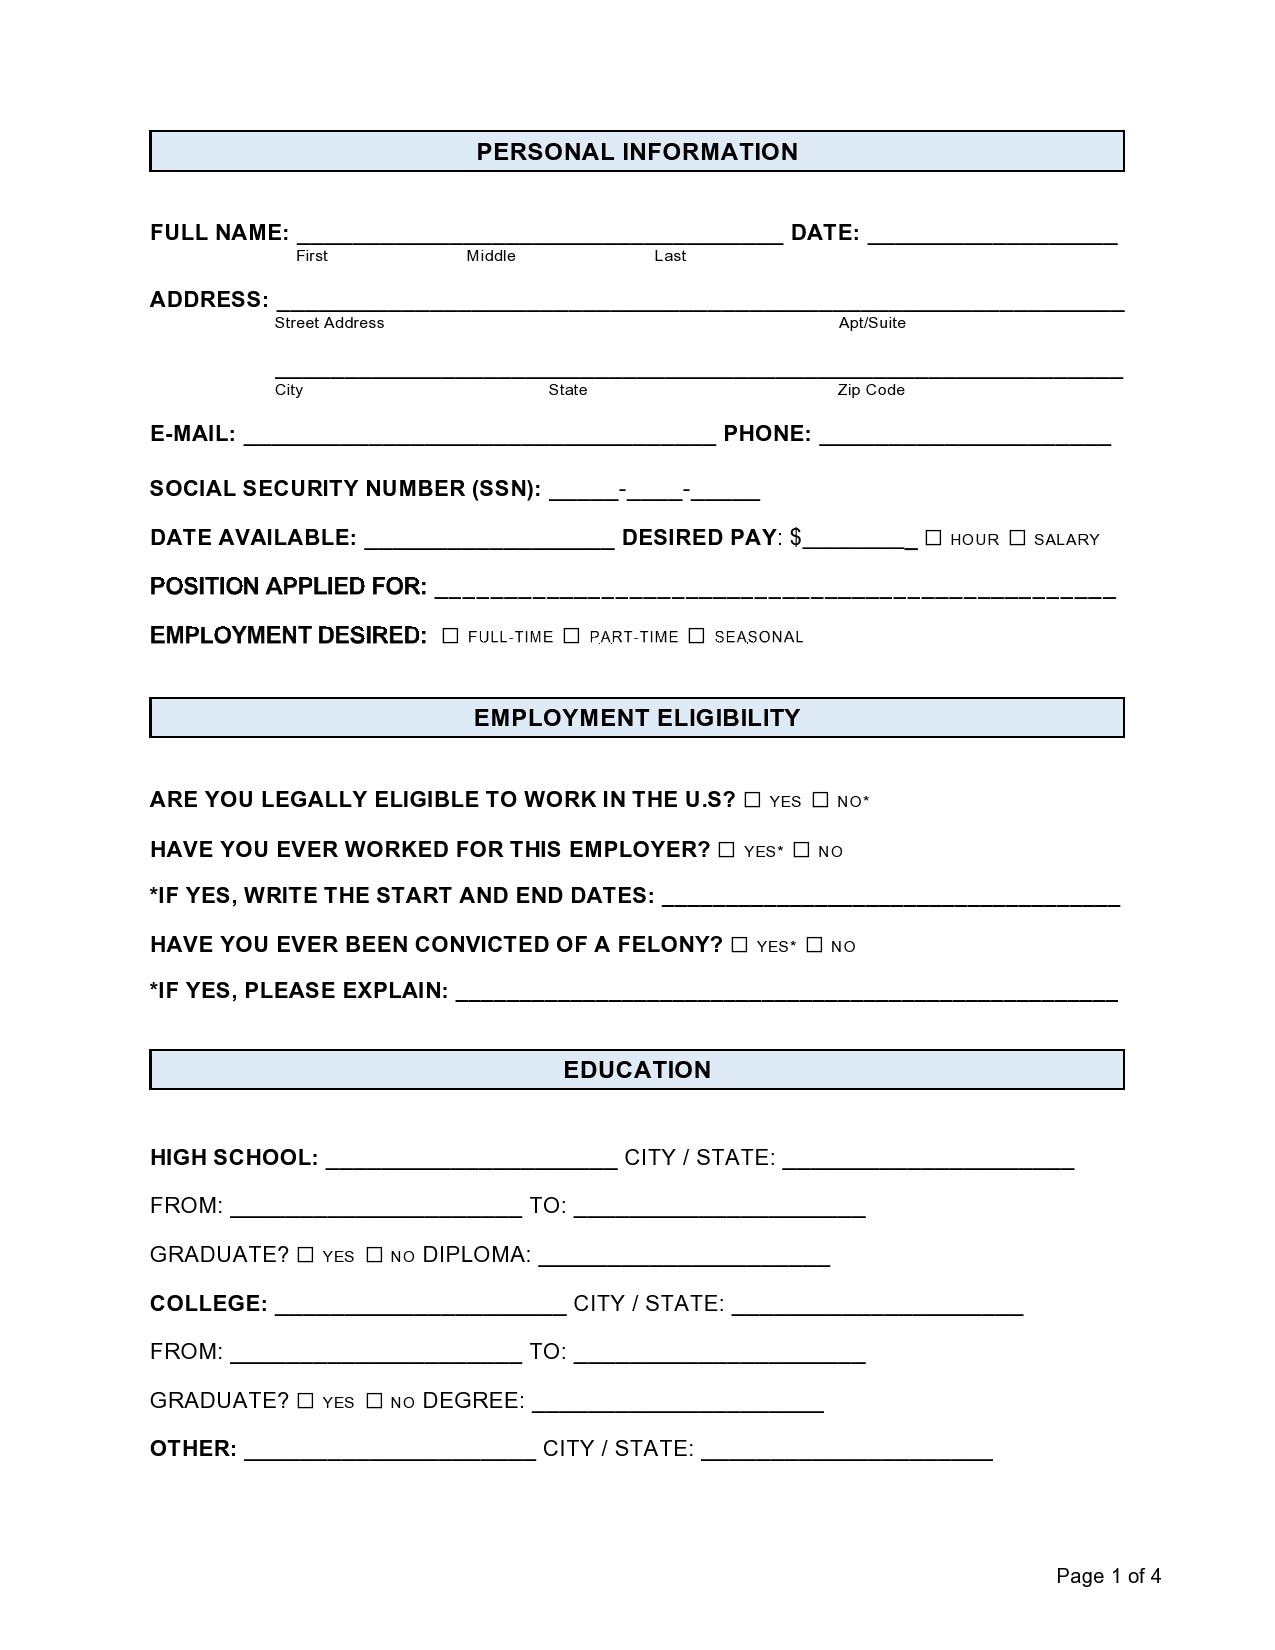 Free personal information form 10